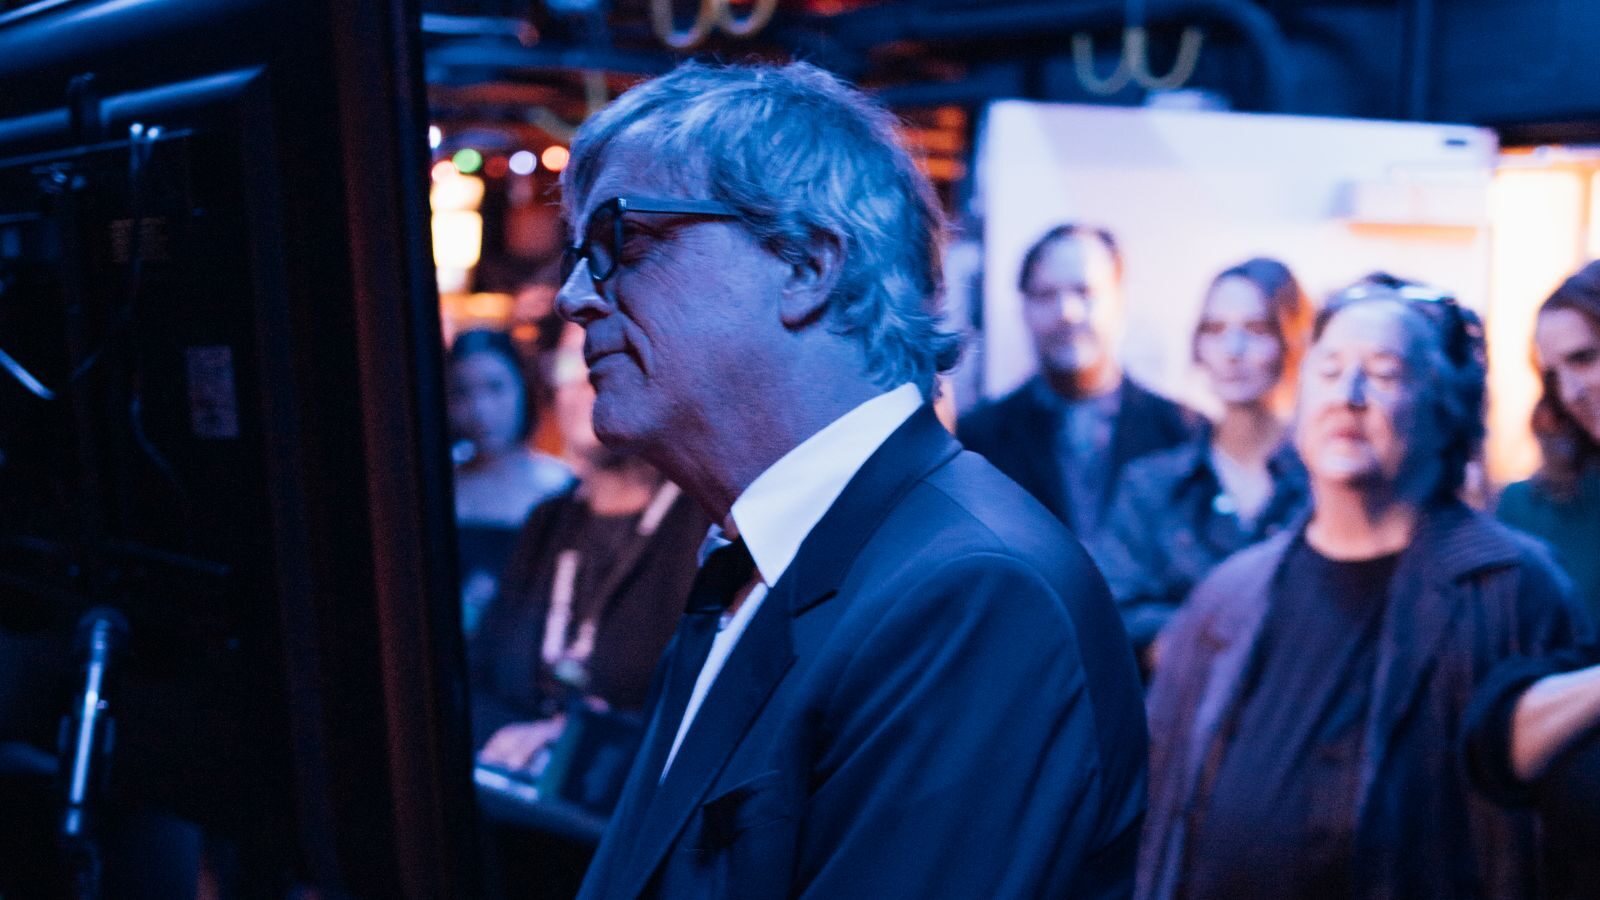 Photos: Todd Haynes's May December Opens the 61st New York Film Festival!